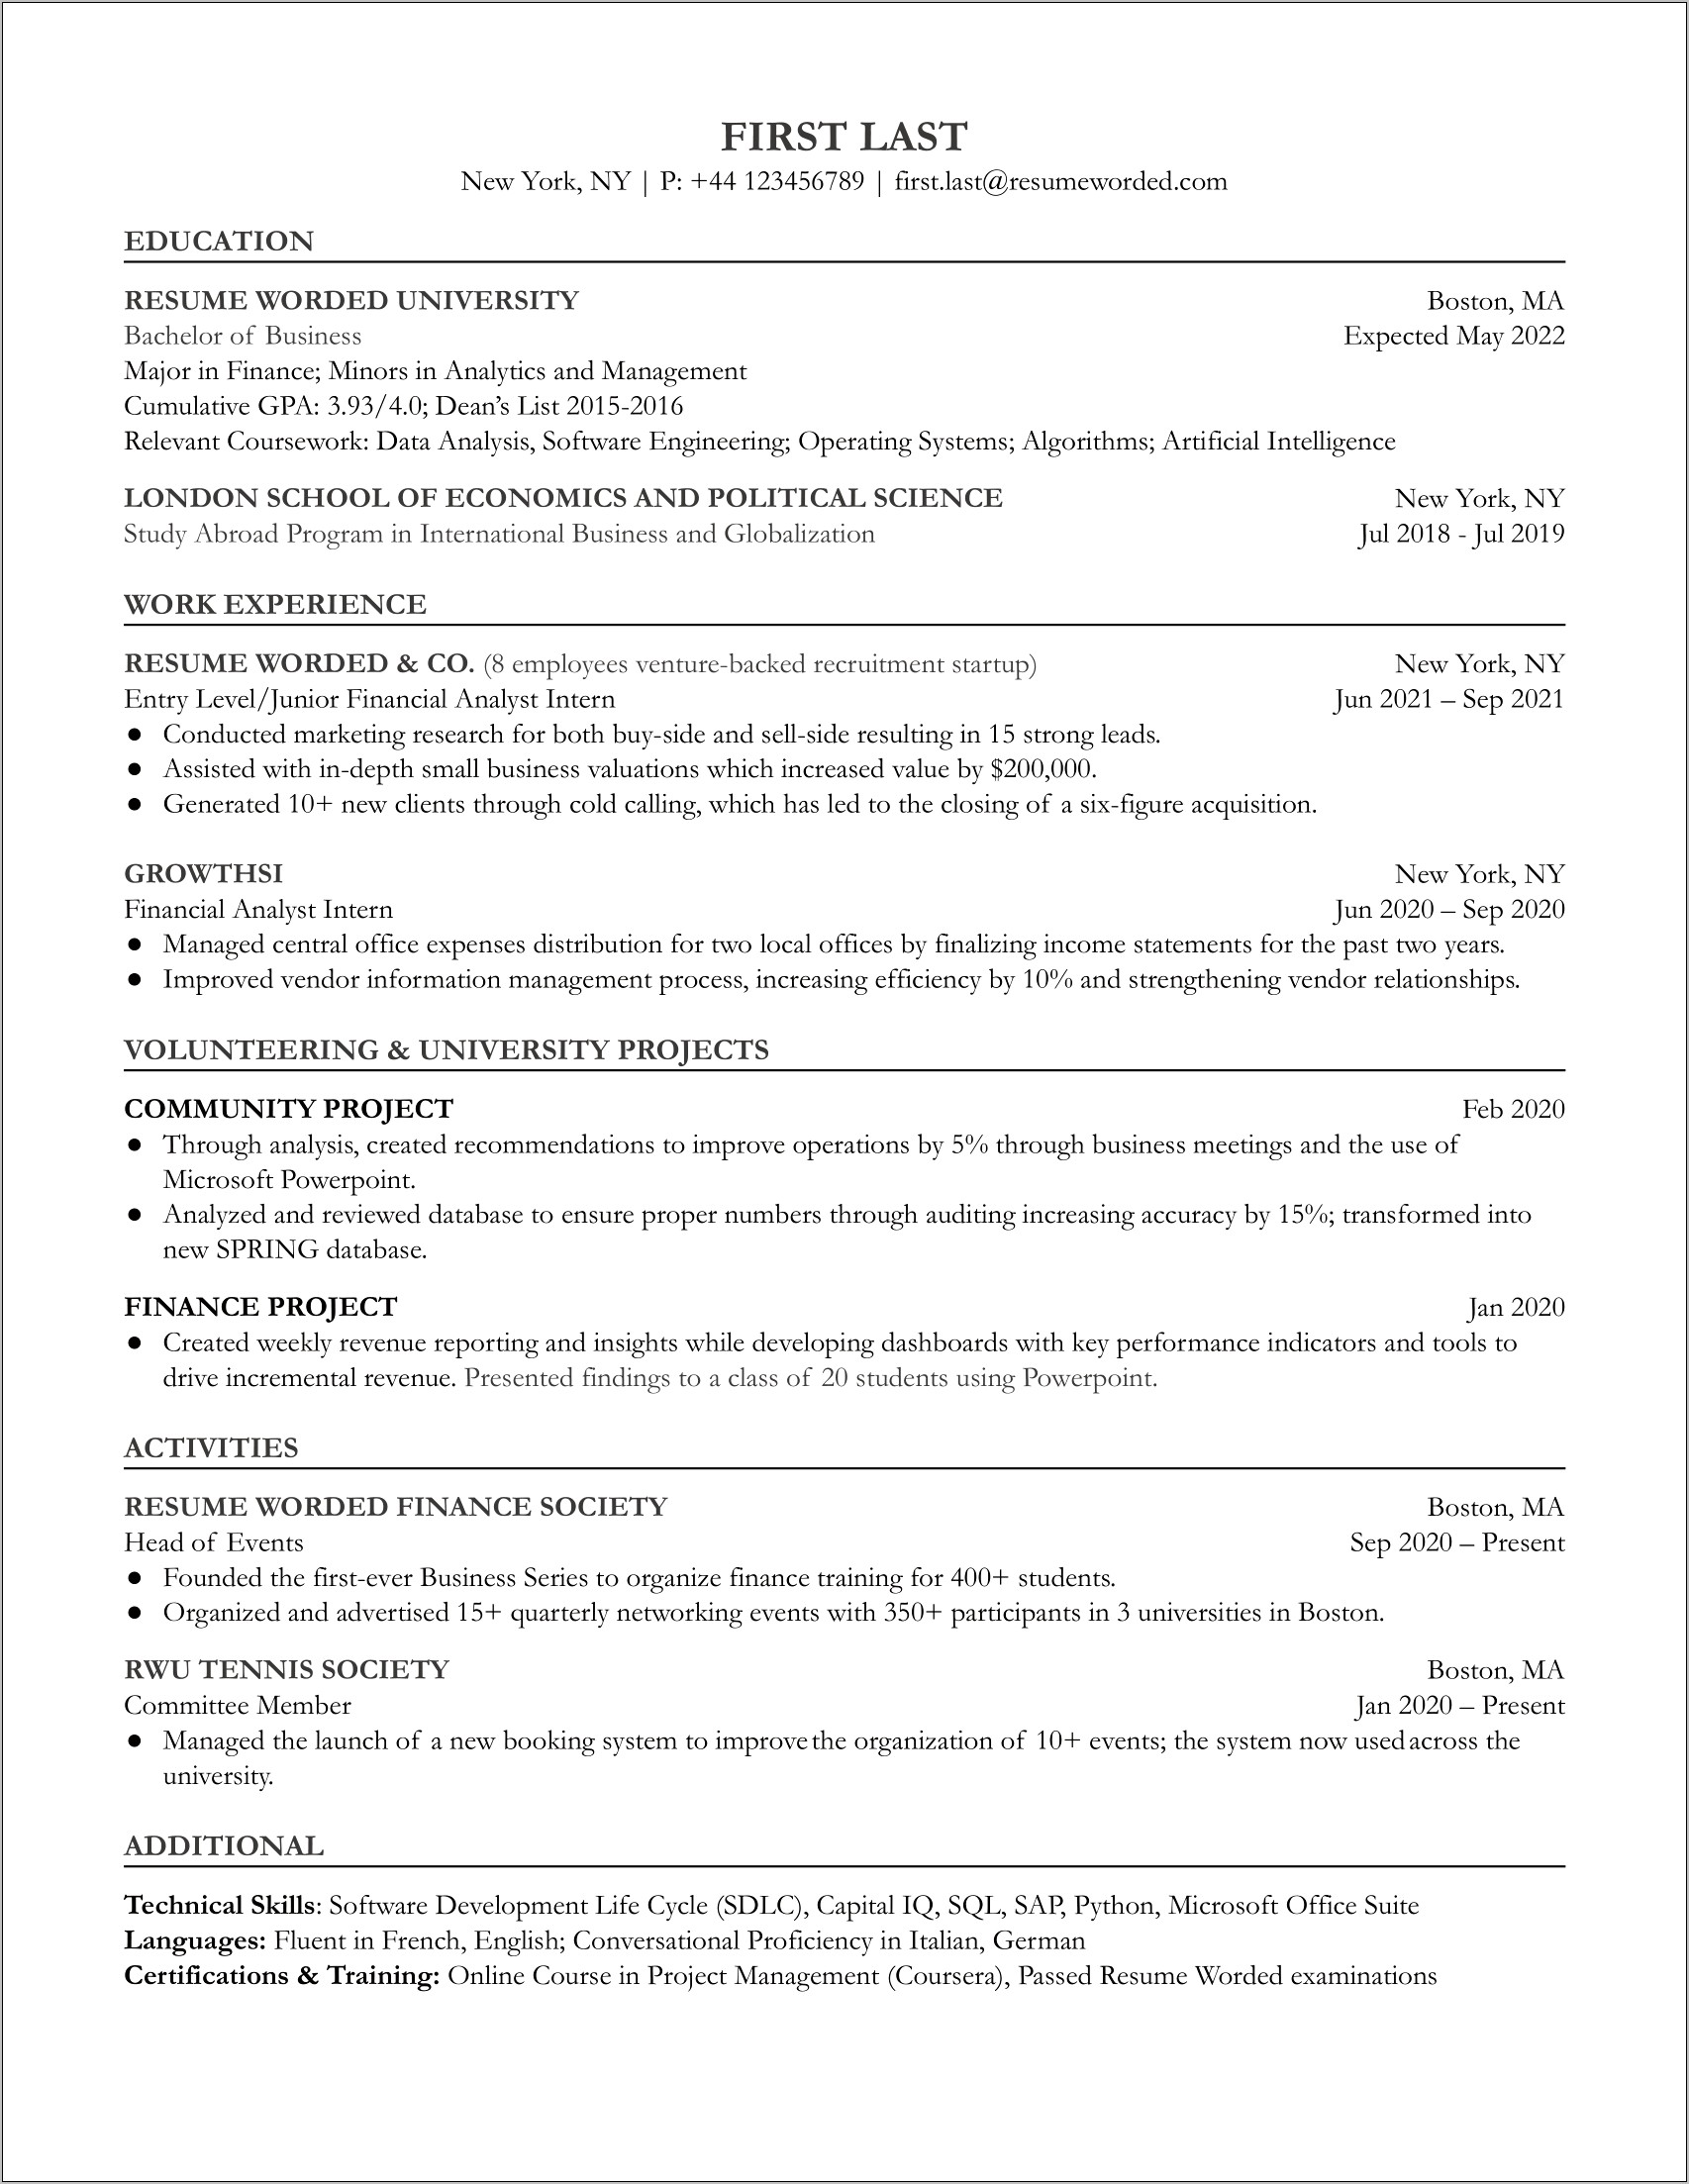 Best Resume Objective For Financial Analyst